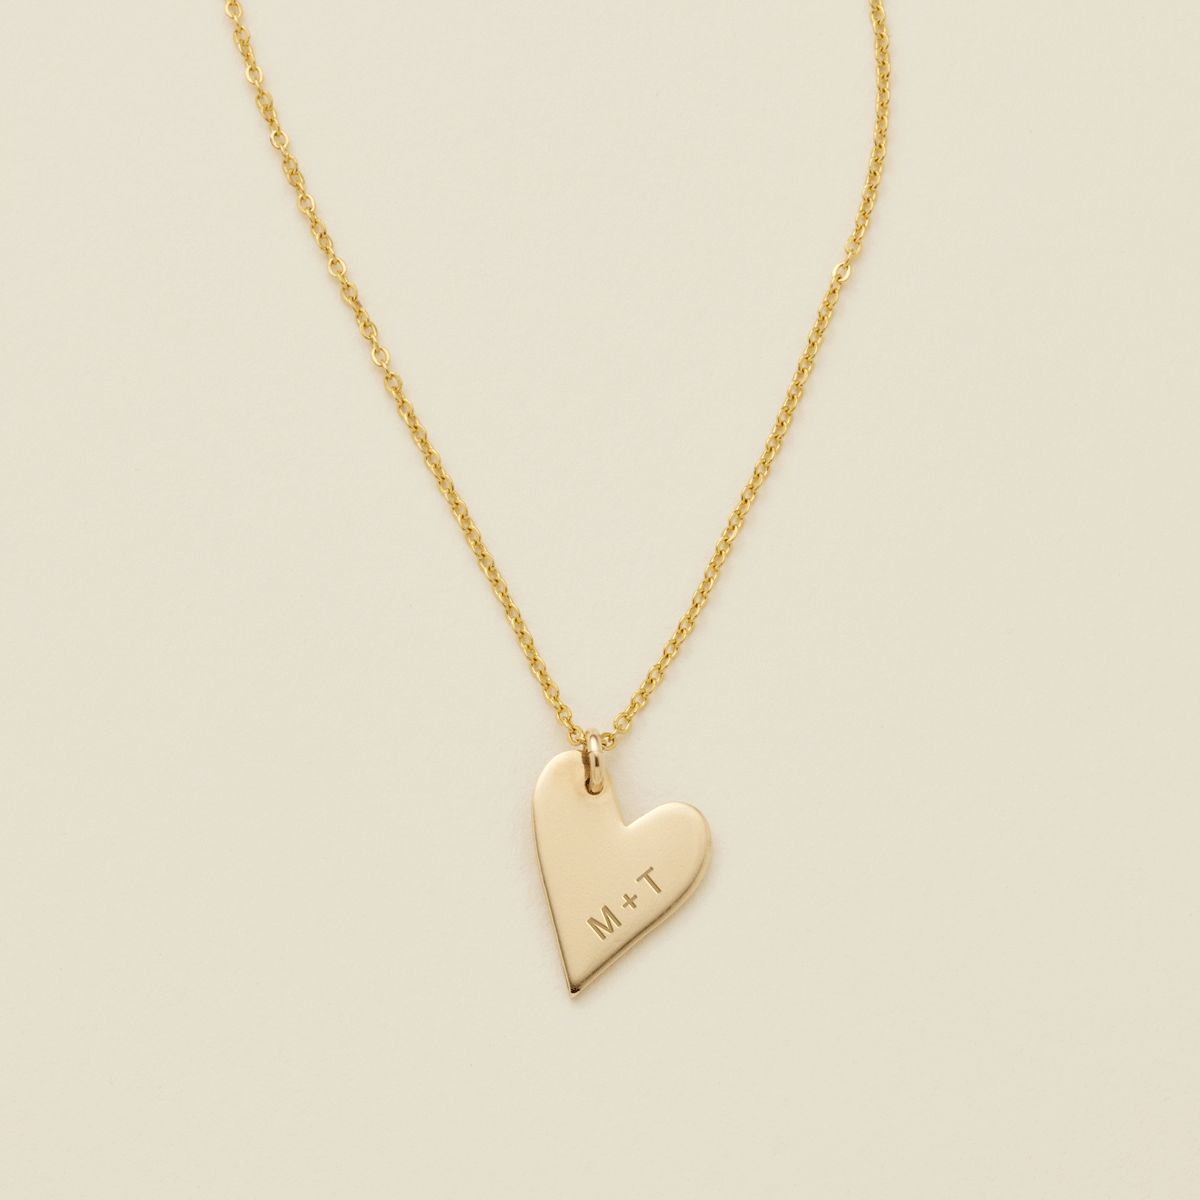 Sweetheart Love Necklace | Made by Mary (US)